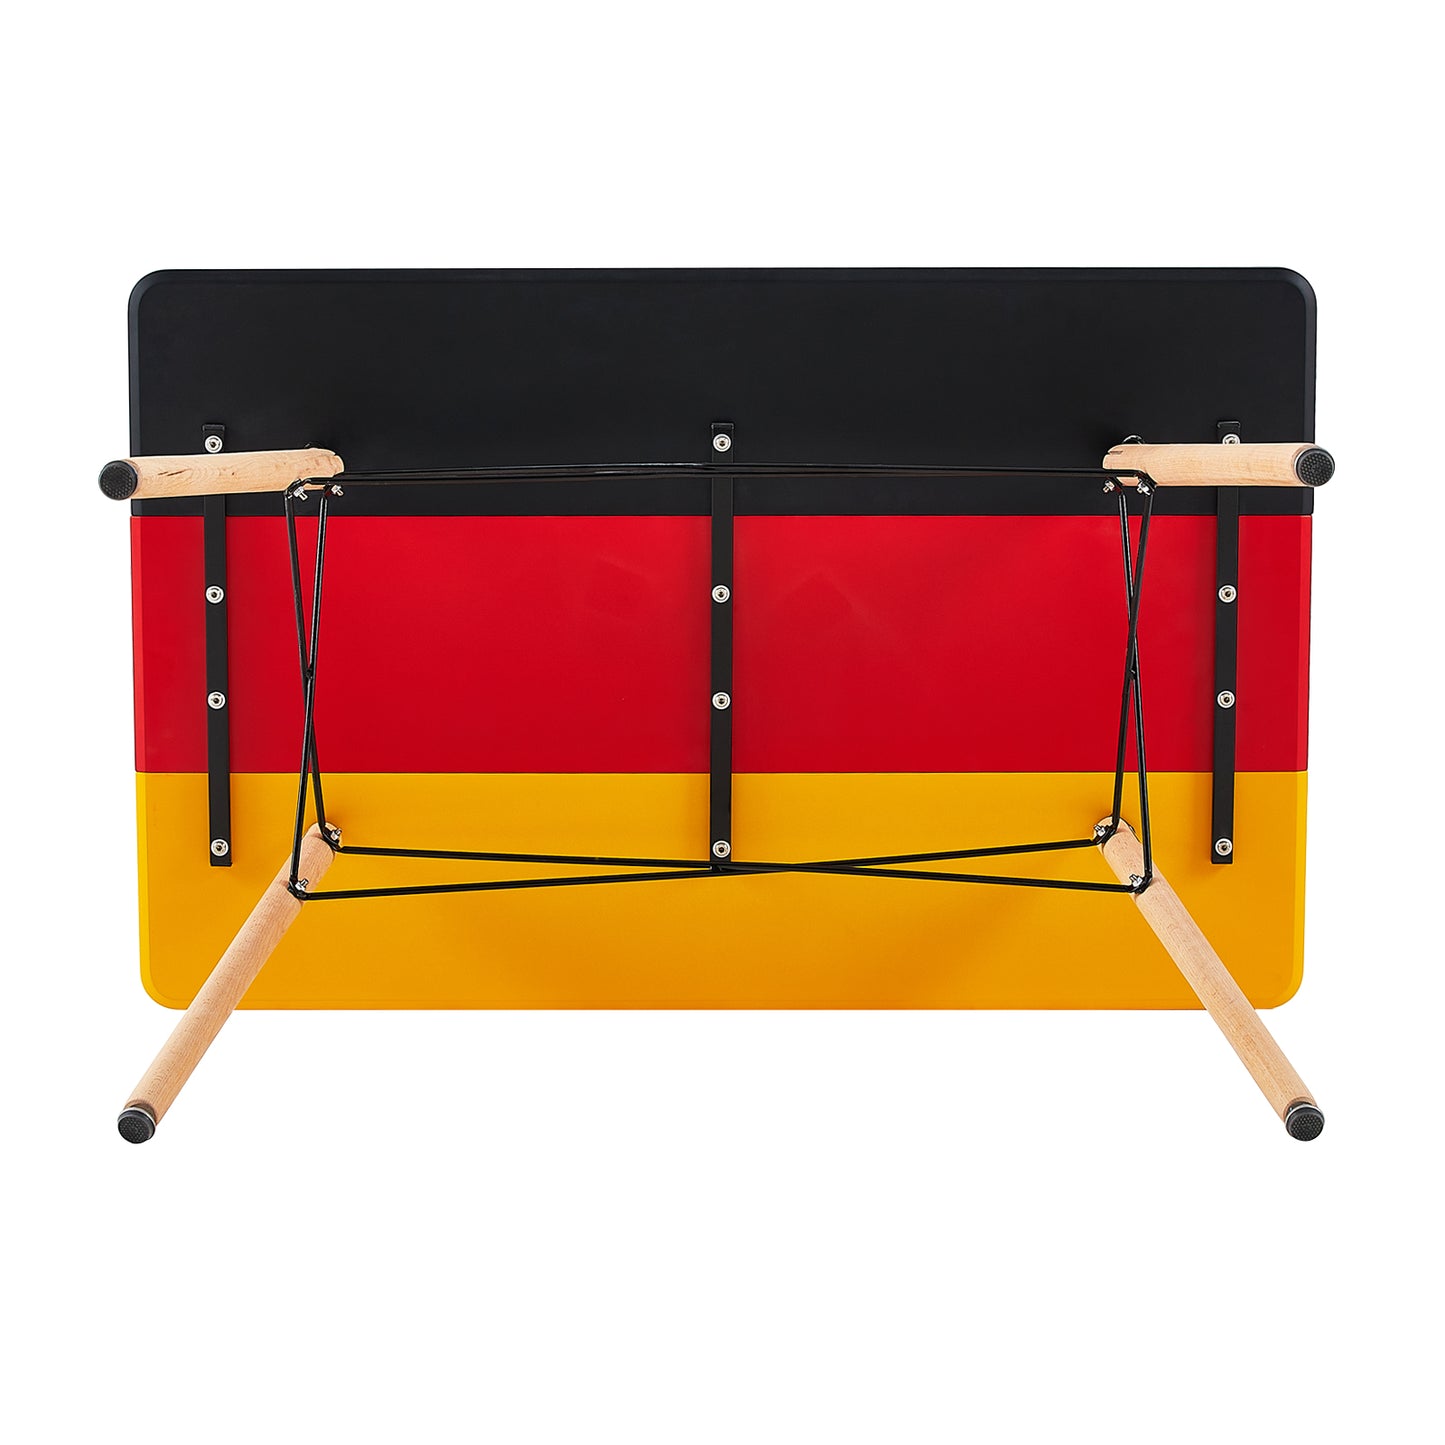 PANSY 110cm Dining Table With Beech Legs-Black Red Yellow